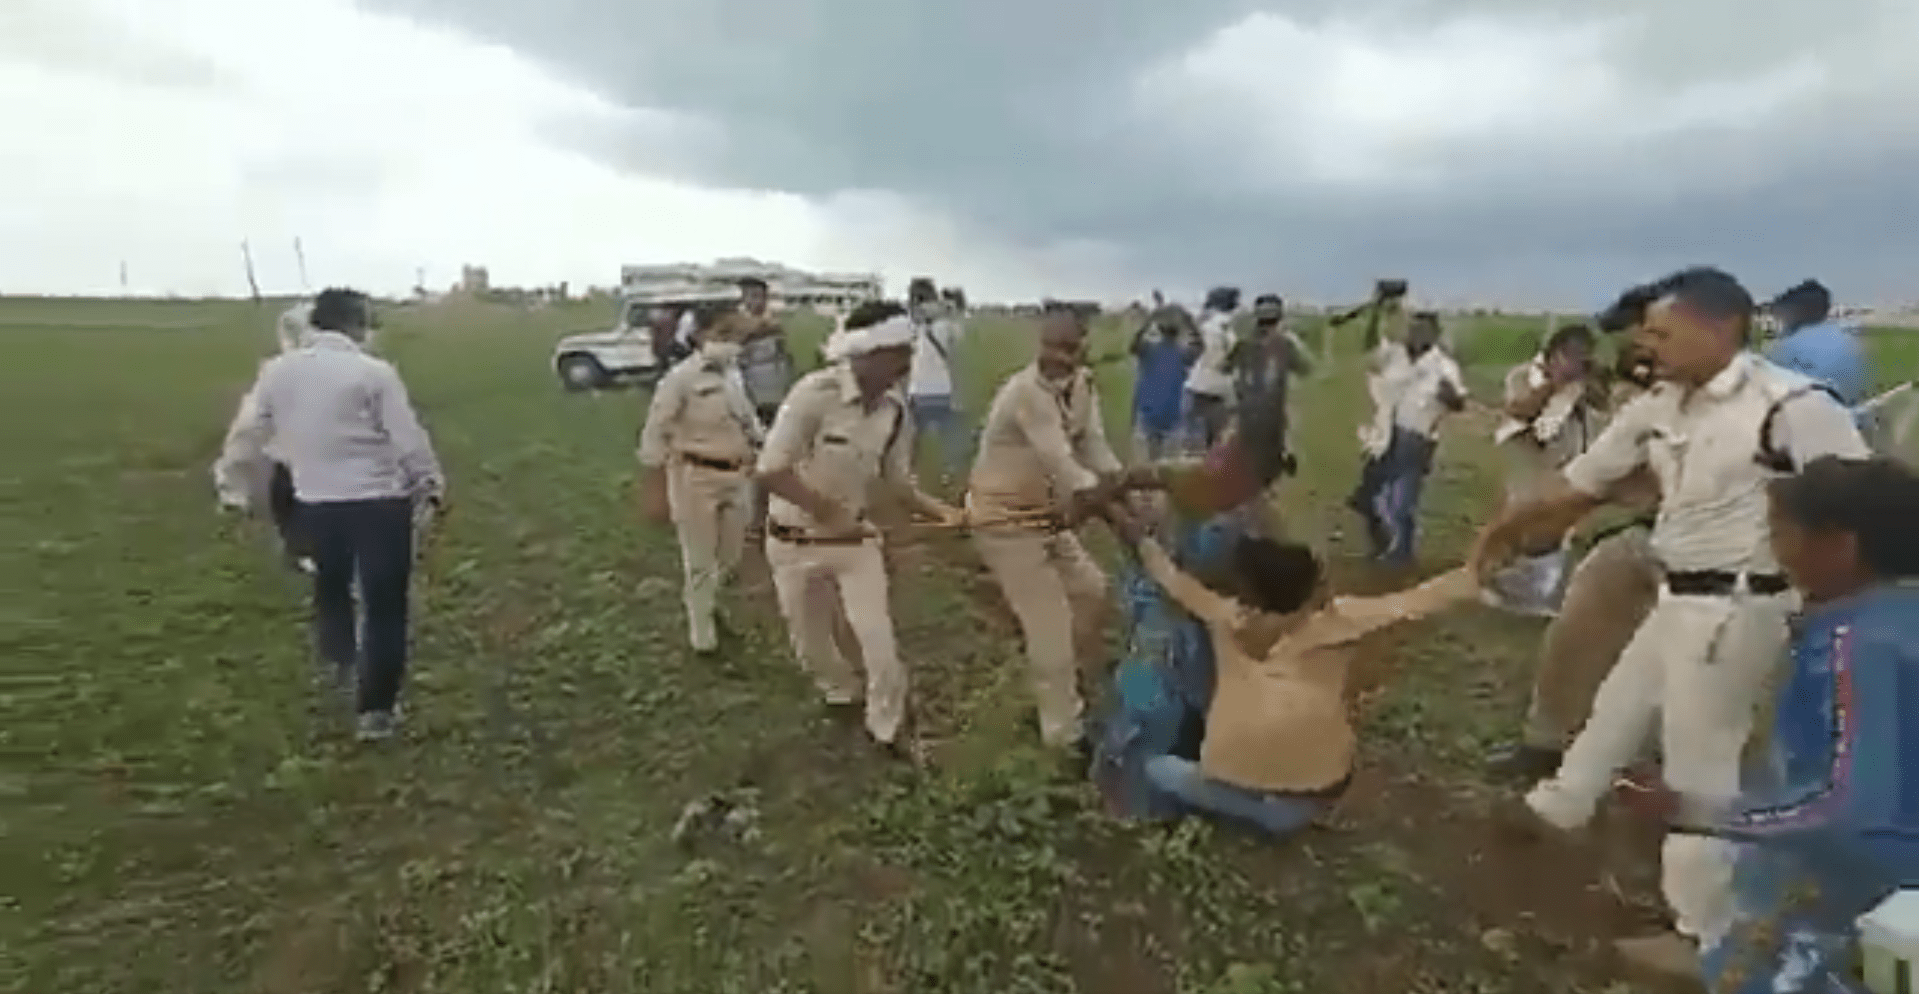 Dalit farmer couple thrashed, dragged by cops on consuming poison in protest